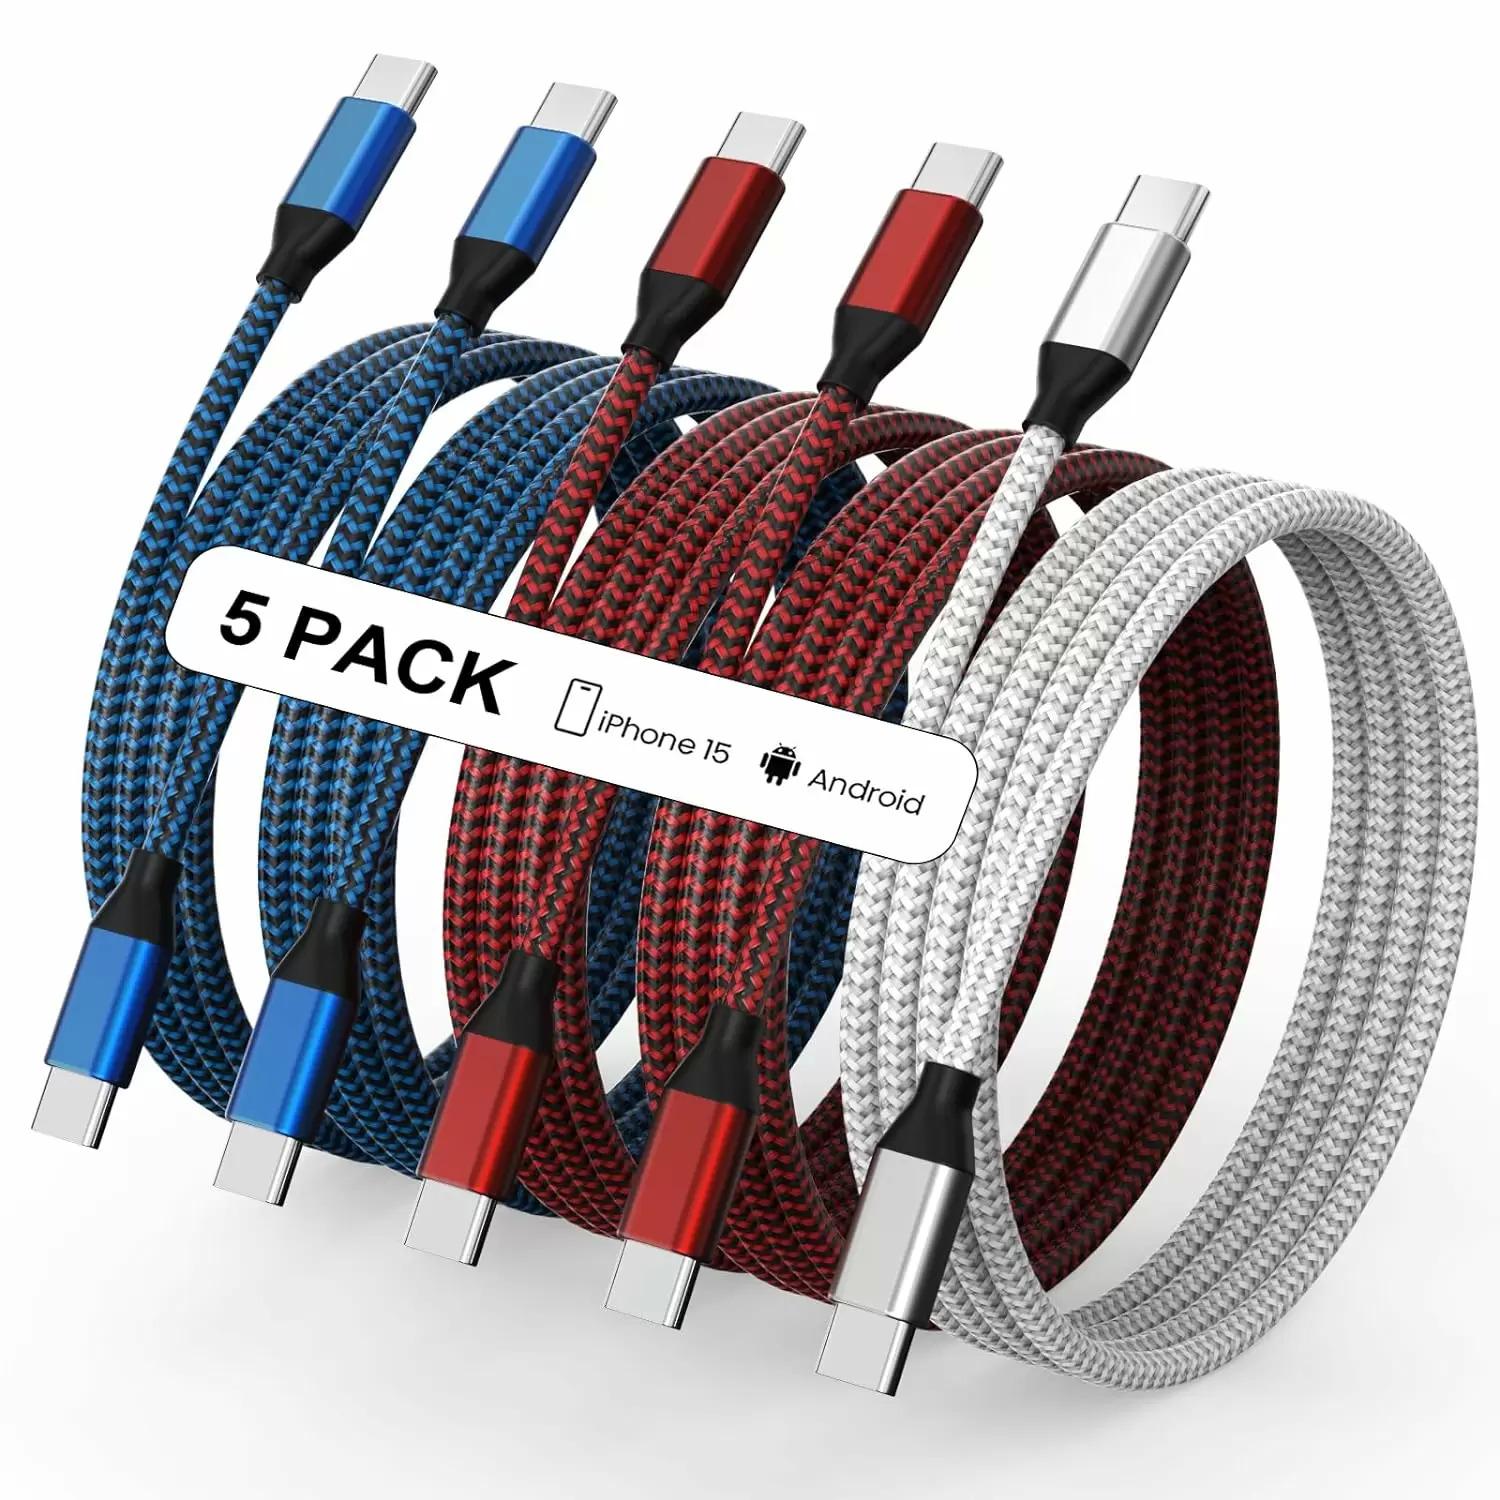 USB-C to USB-C Nylon Braided Charging Cables 5 Pack for $3.99